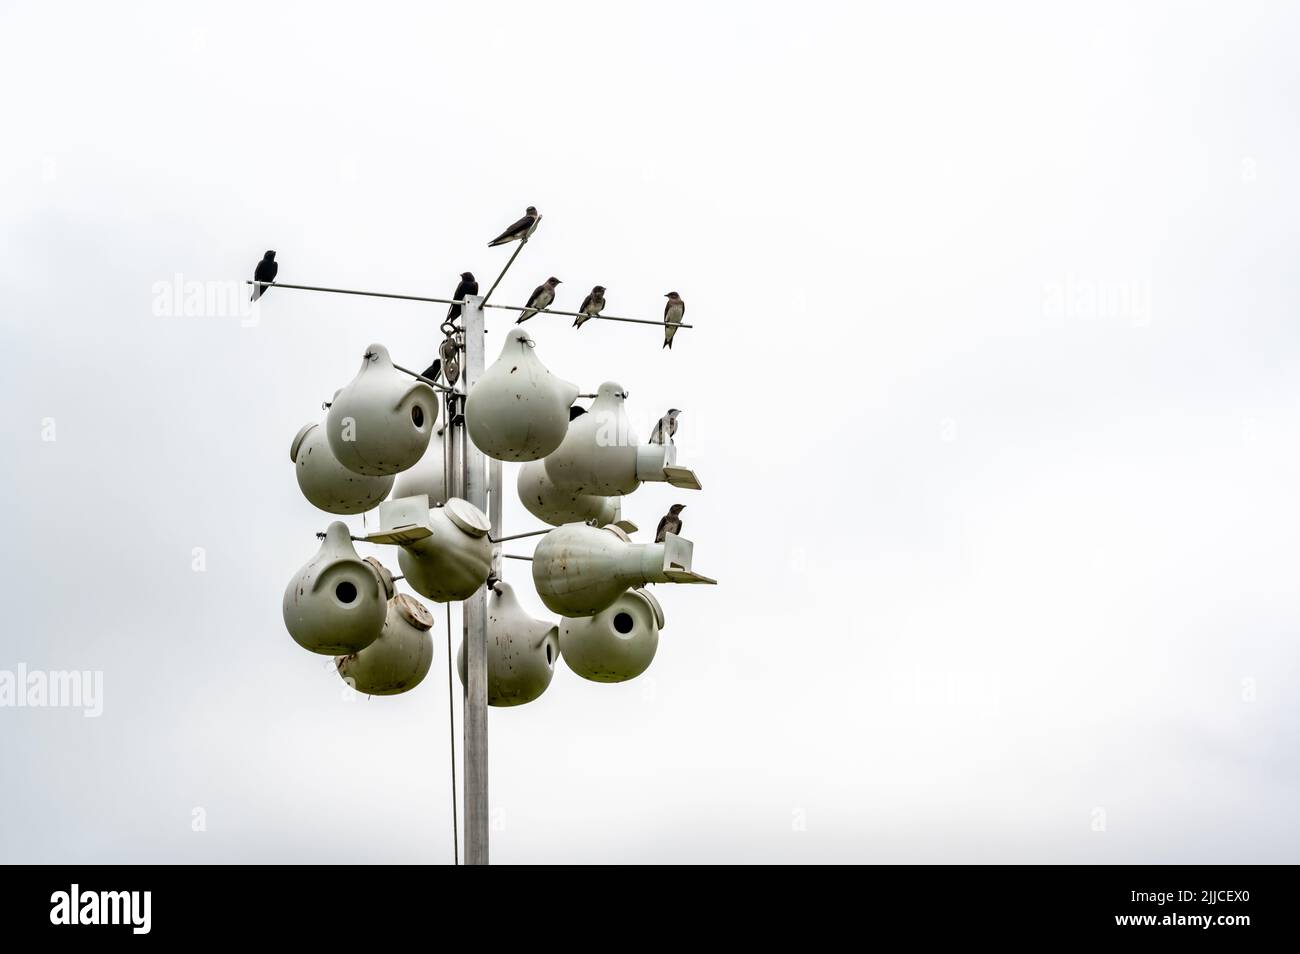 Grouping of purple martin birds perched on a raised nesting house. Stock Photo